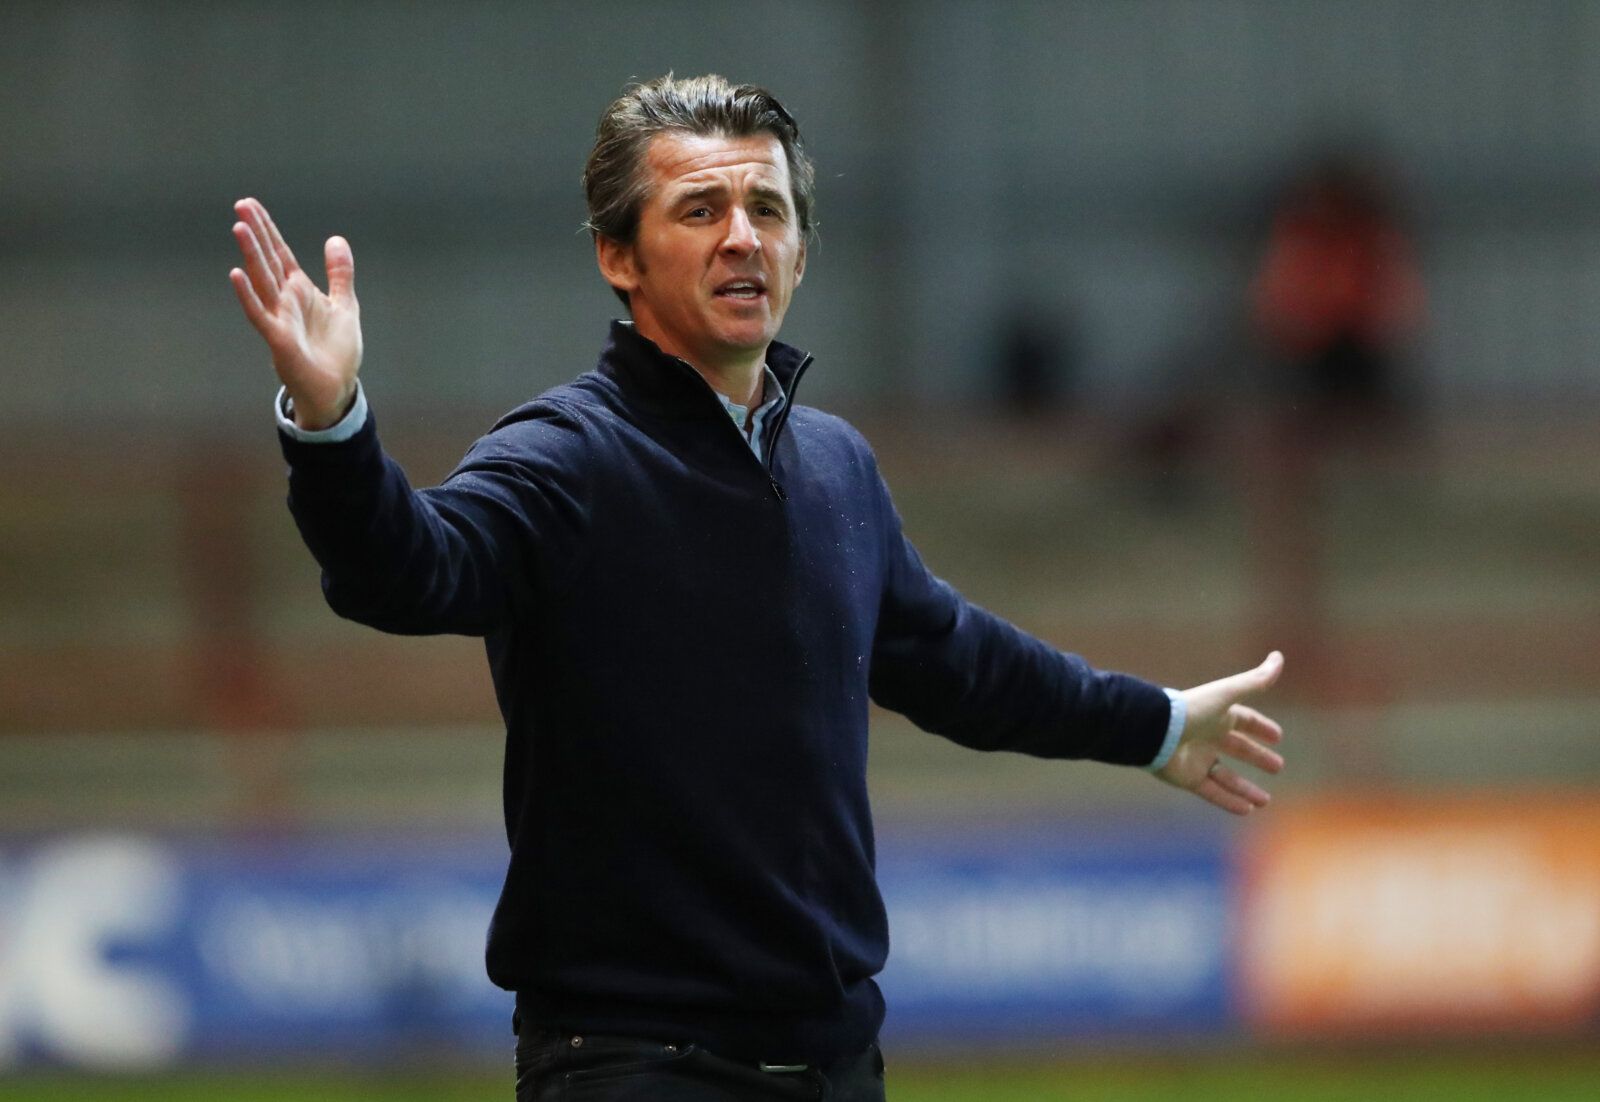 Soccer Football - Carabao Cup Third Round - Fleetwood Town v Everton - Highbury Stadium, Fleetwood, Britain - September 23, 2020 Fleetwood Town manager Joey Barton reacts Pool via REUTERS/Alex Livesey EDITORIAL USE ONLY. No use with unauthorized audio, video, data, fixture lists, club/league logos or 'live' services. Online in-match use limited to 75 images, no video emulation. No use in betting, games or single club/league/player publications.  Please contact your account representative for fur